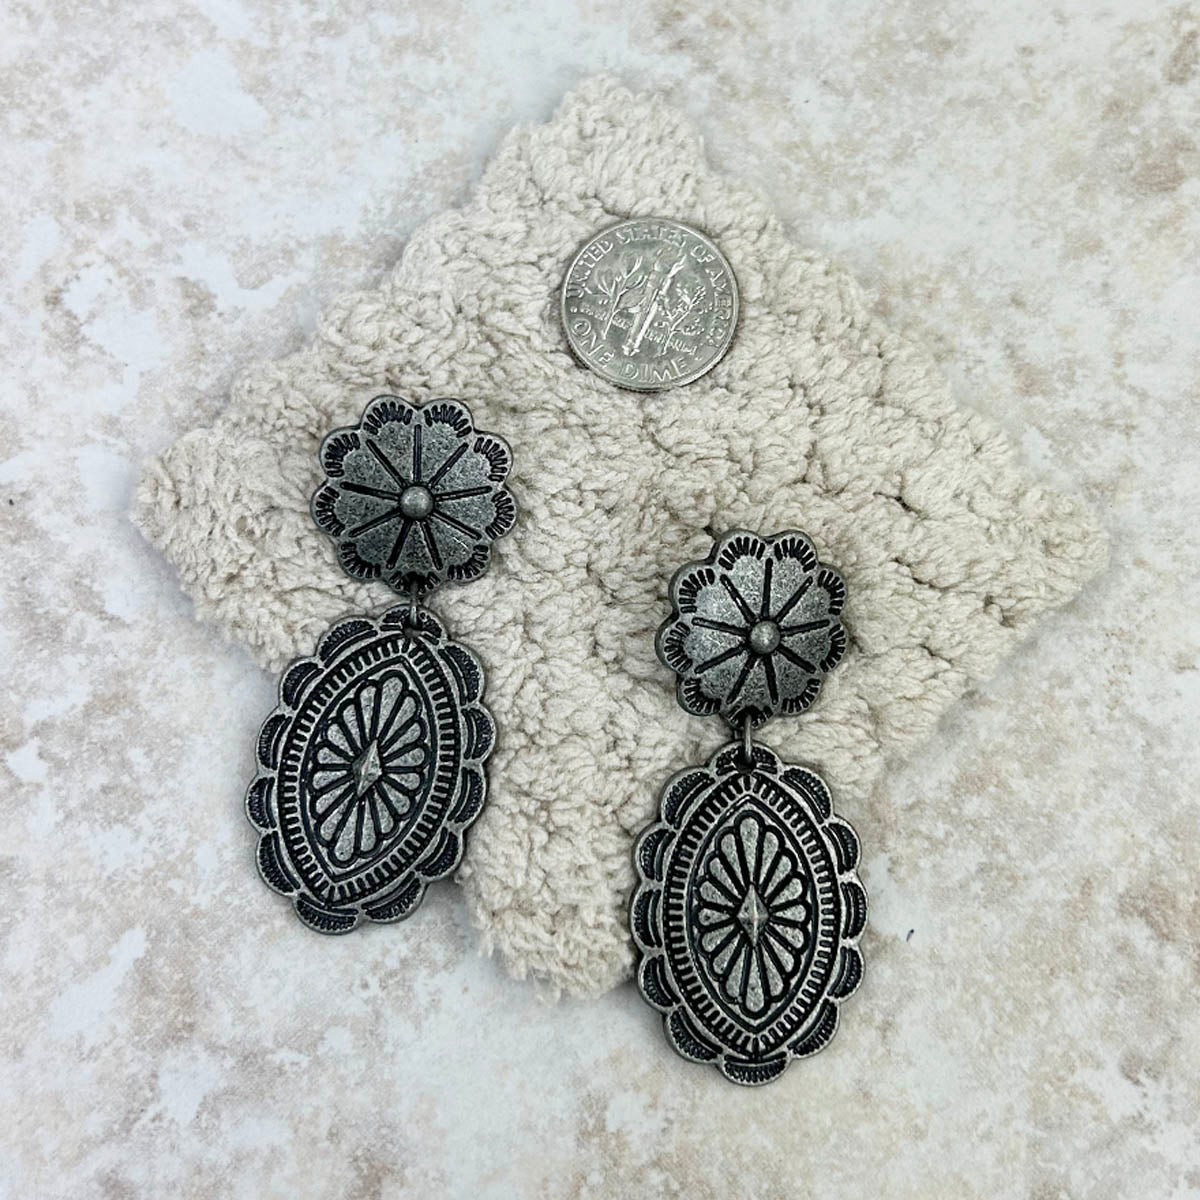 Antique silver oval concho Earrings